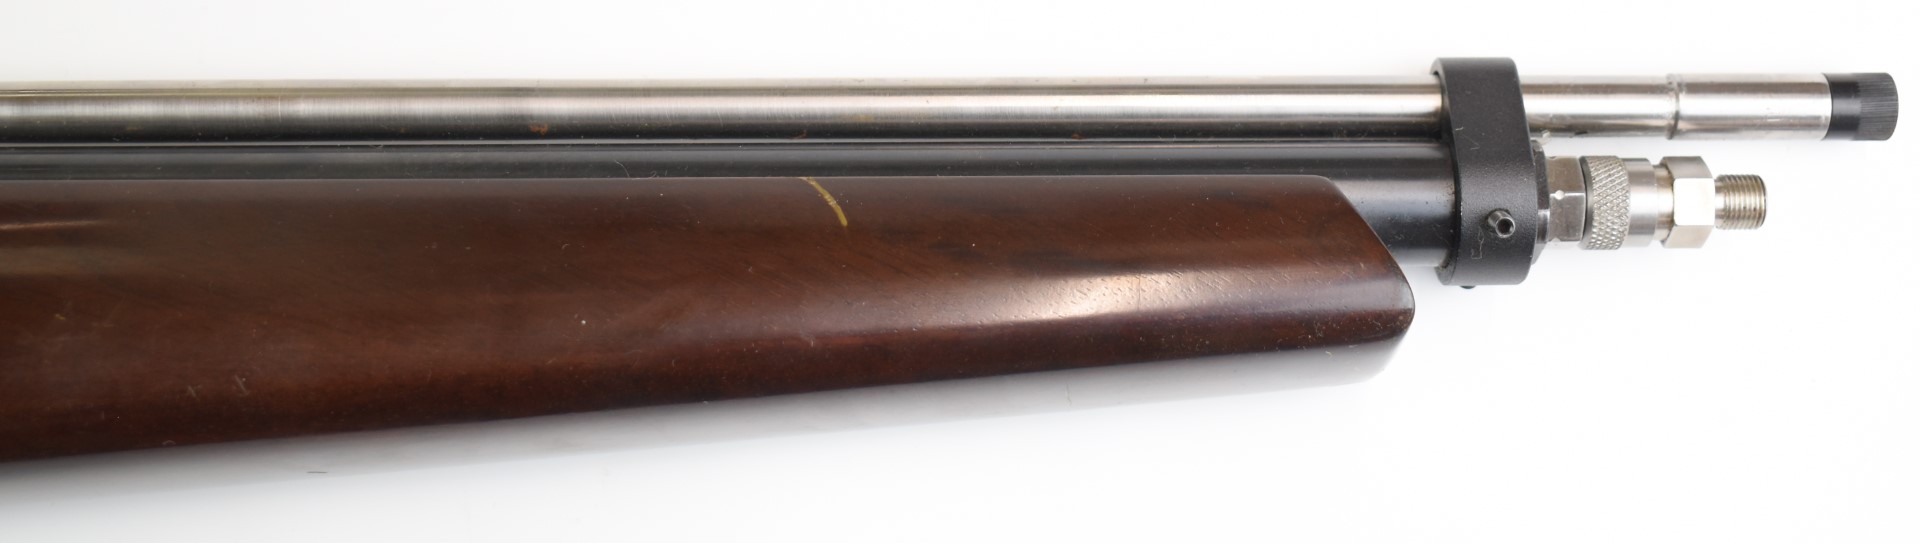 AGS-PCR1 .22 PCP bolt-action air rifle with pistol grip and adjustable trigger, serial number 00911. - Image 5 of 9